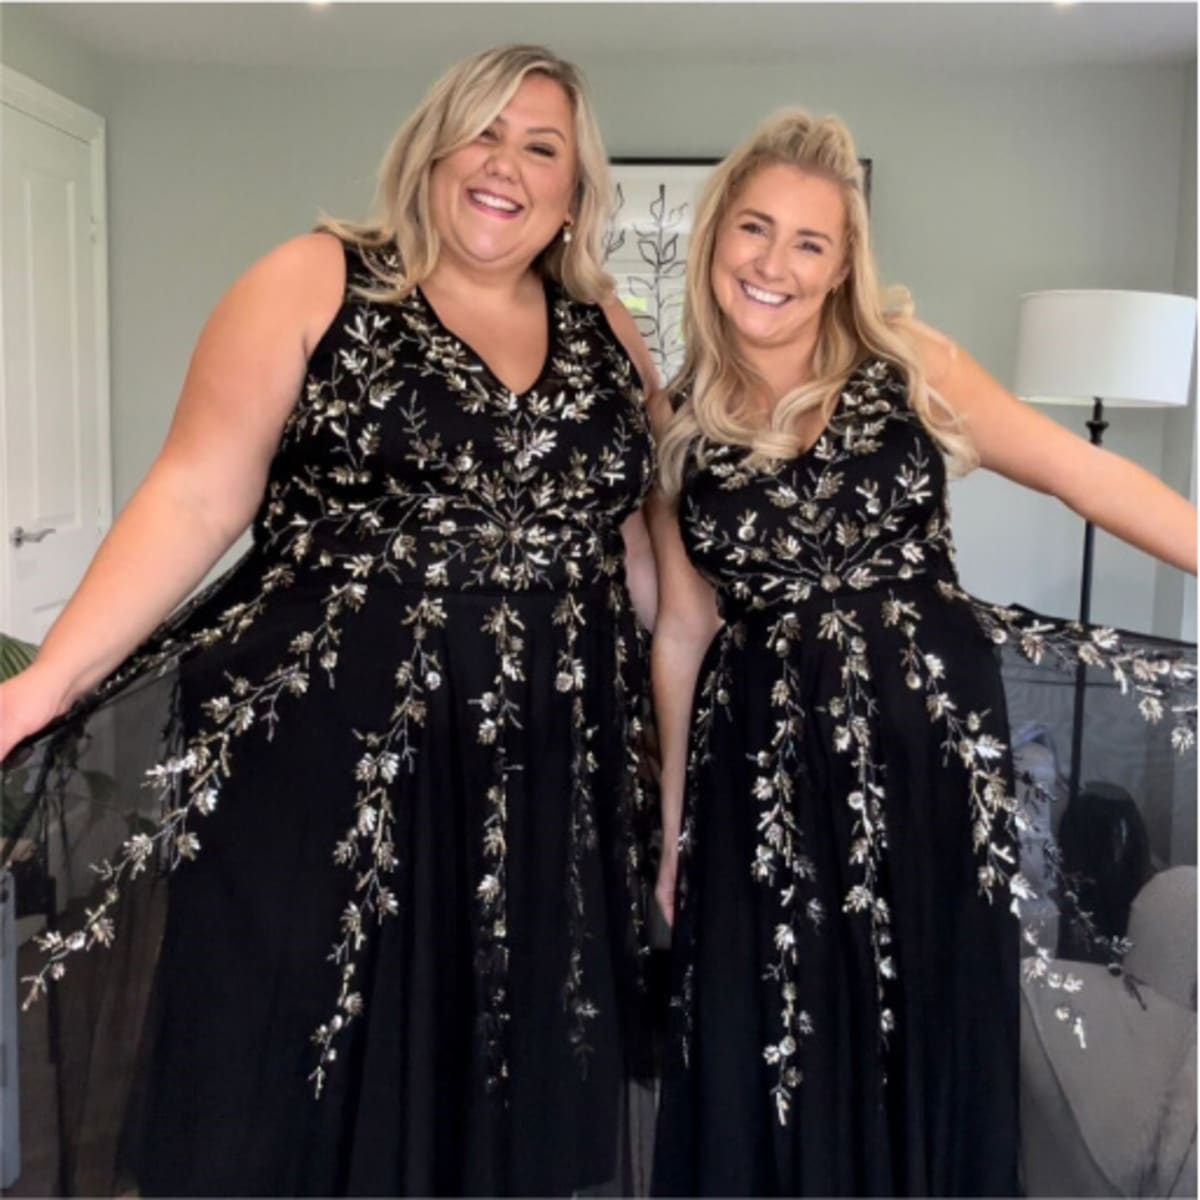 Two women in black floral patterned evening dresses